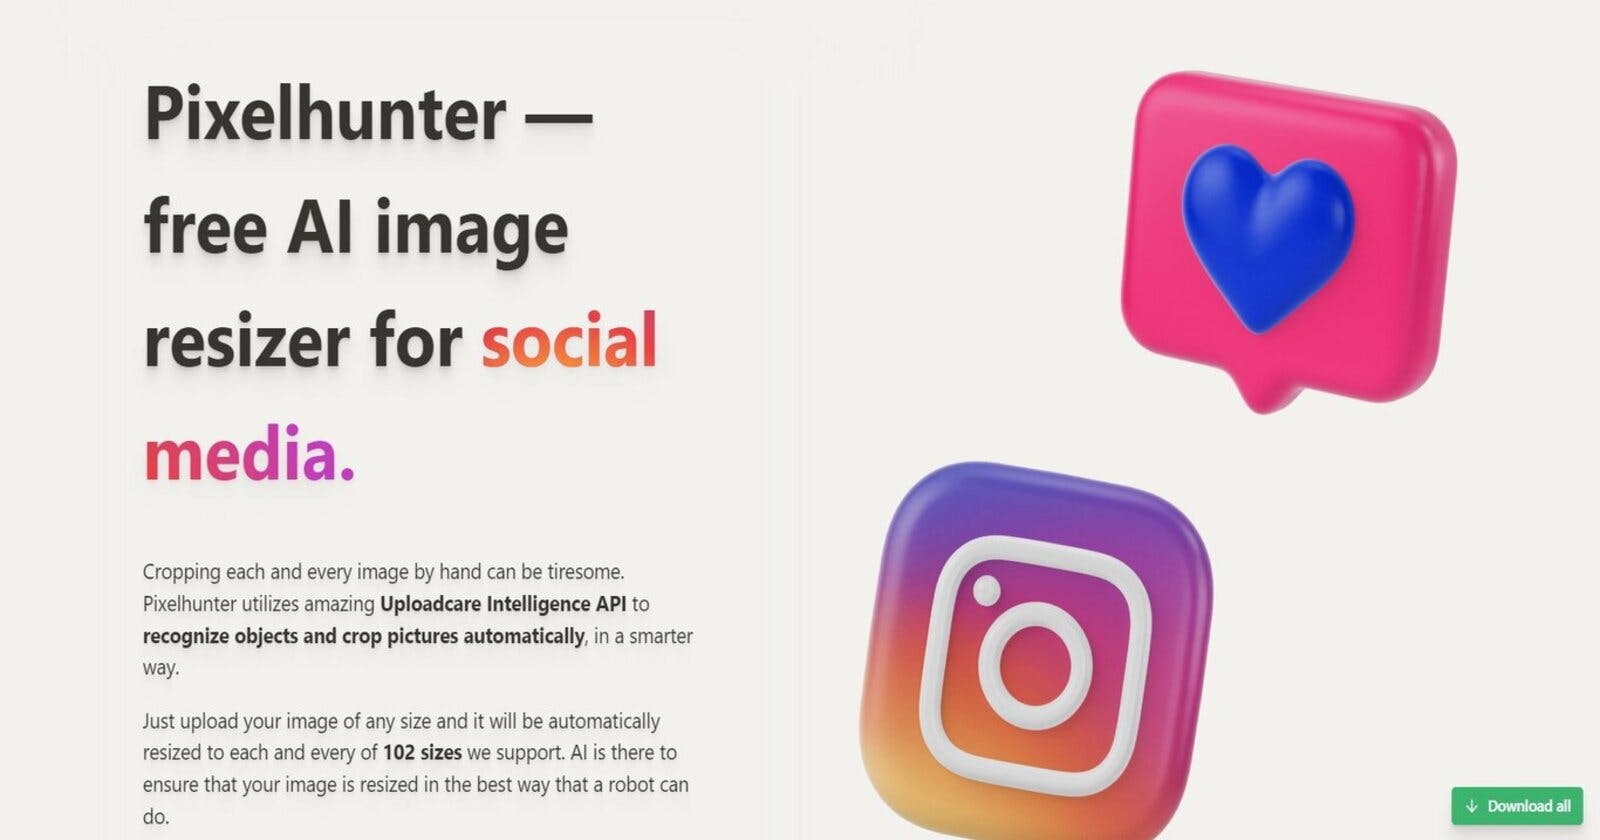 Pixelhunter: Elevate Your Social Media Visuals with AI-Powered Image Resizing